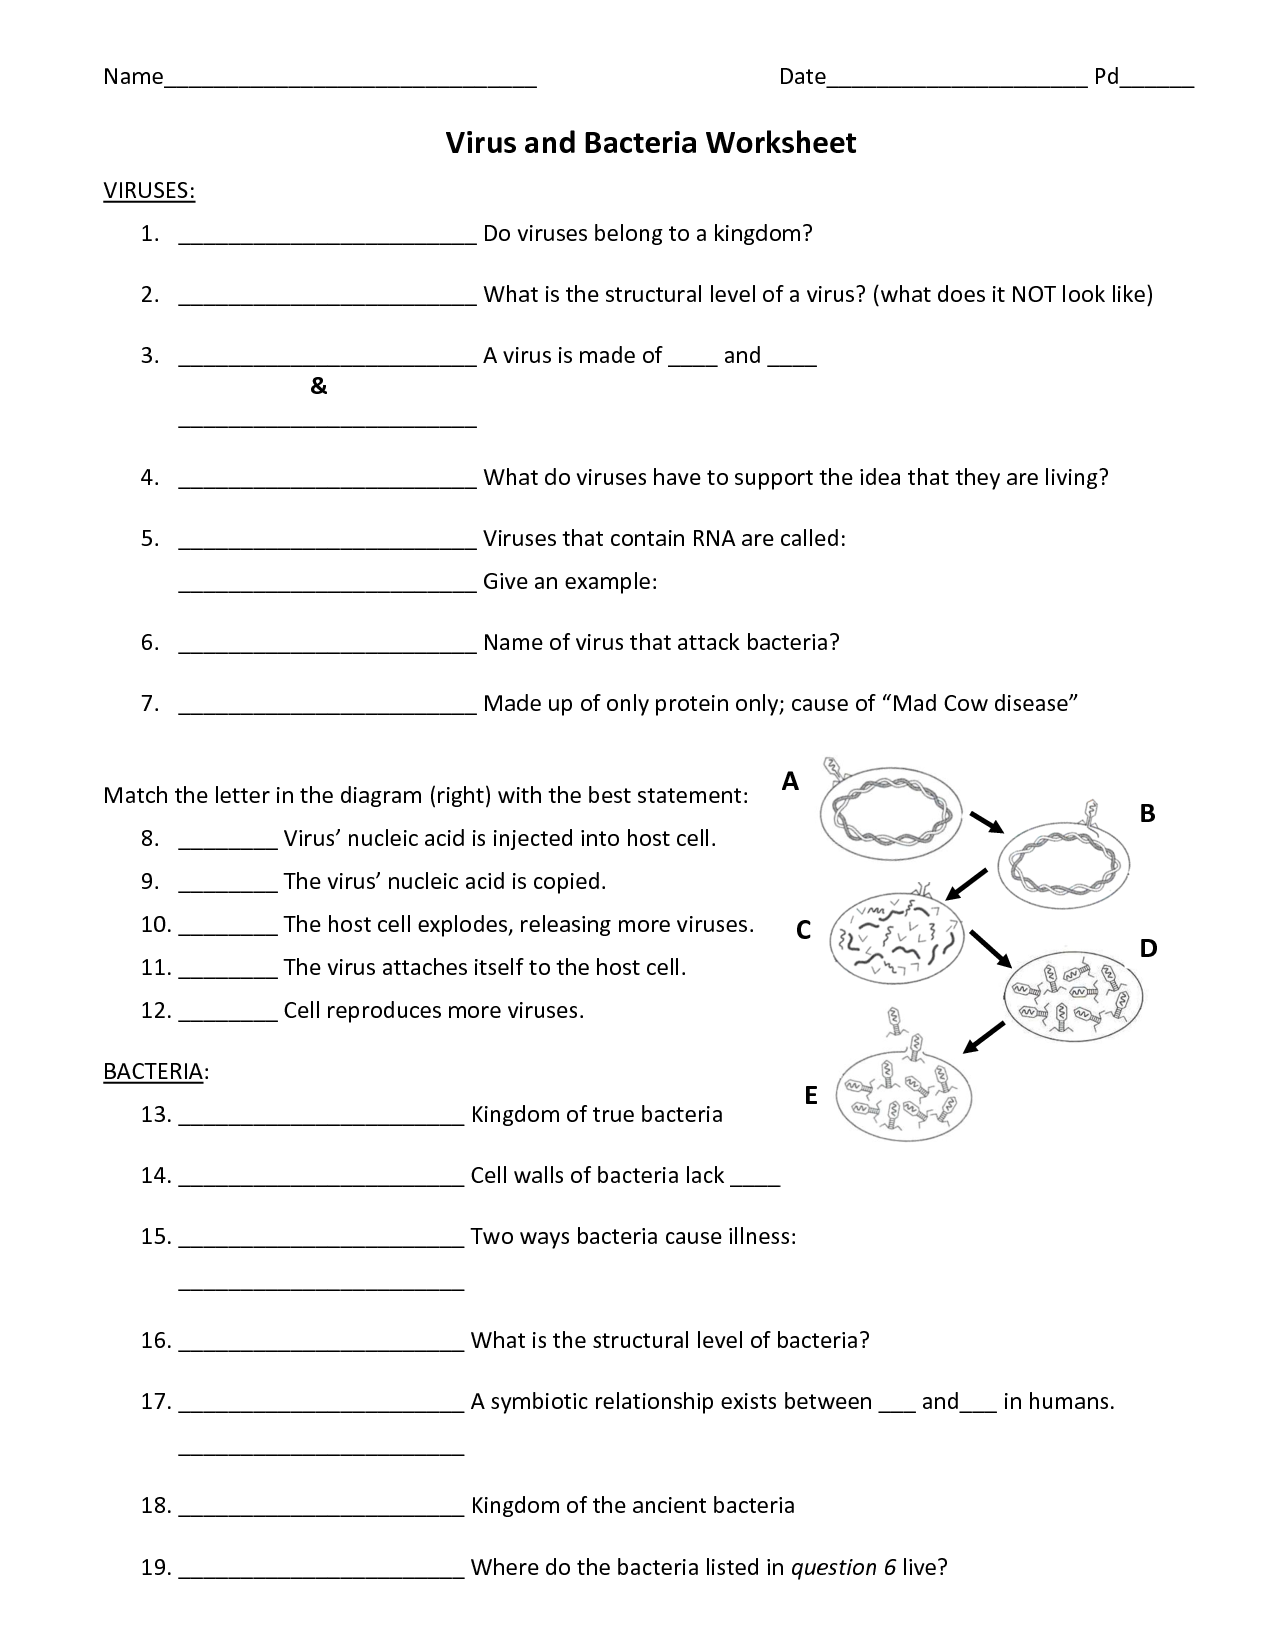 virus and bacteria critical thinking worksheet answers